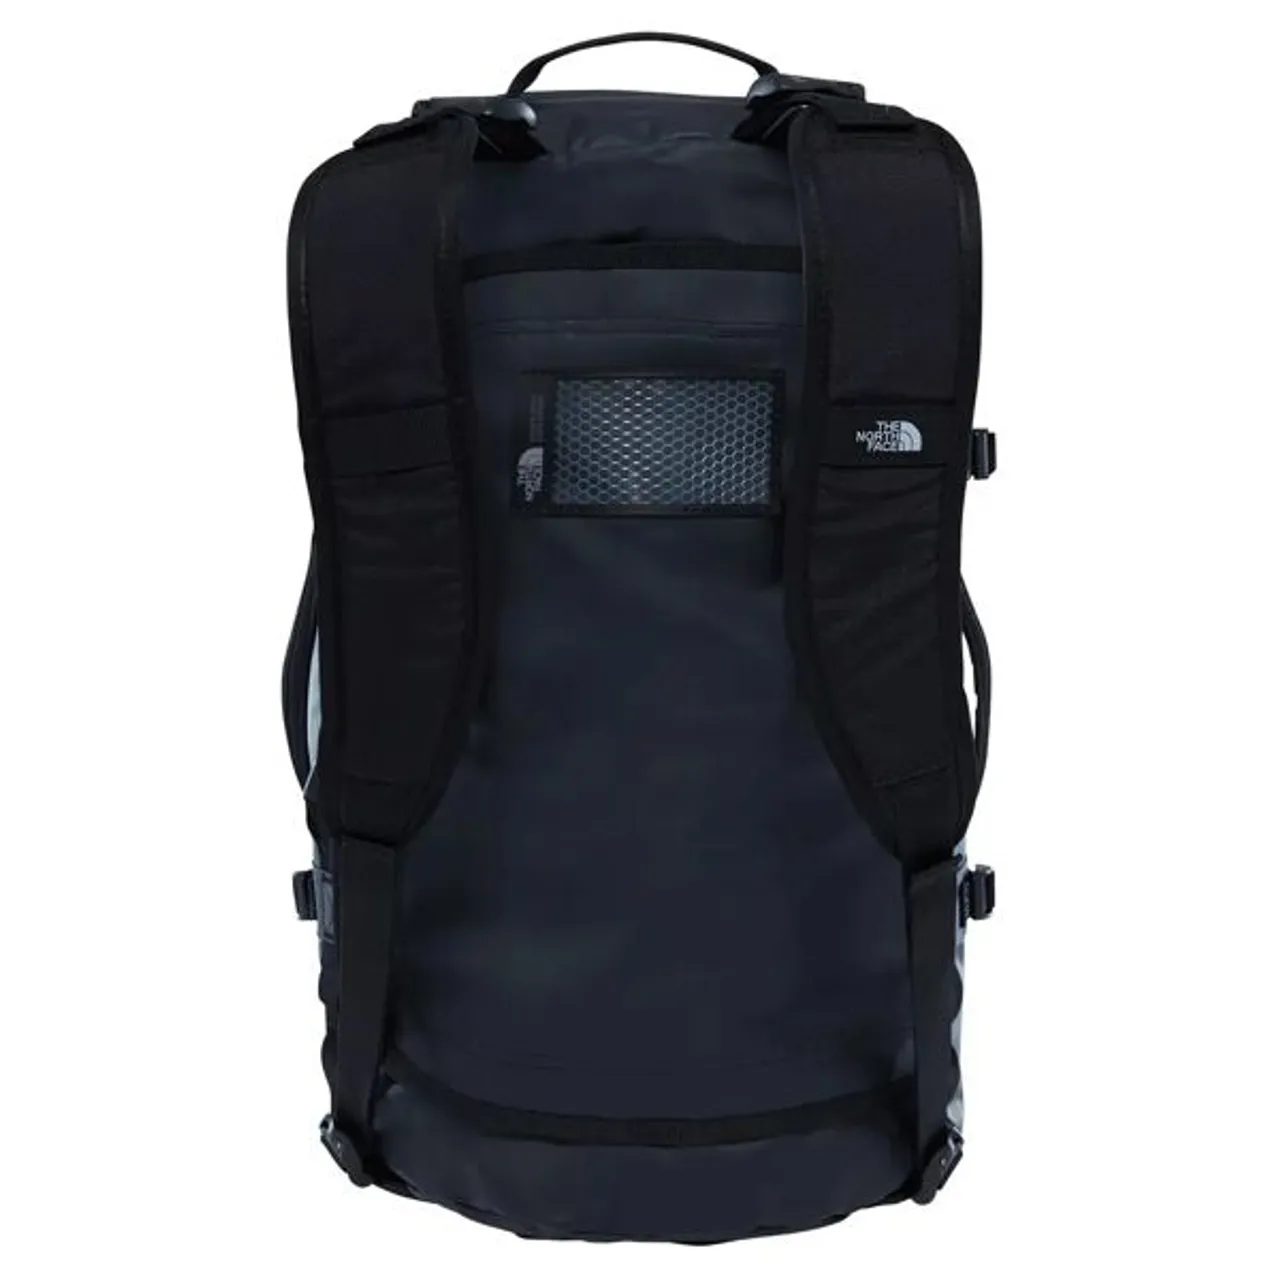 The North Face Base Camp Duffle Bag, Small, Black - Black - Unisex